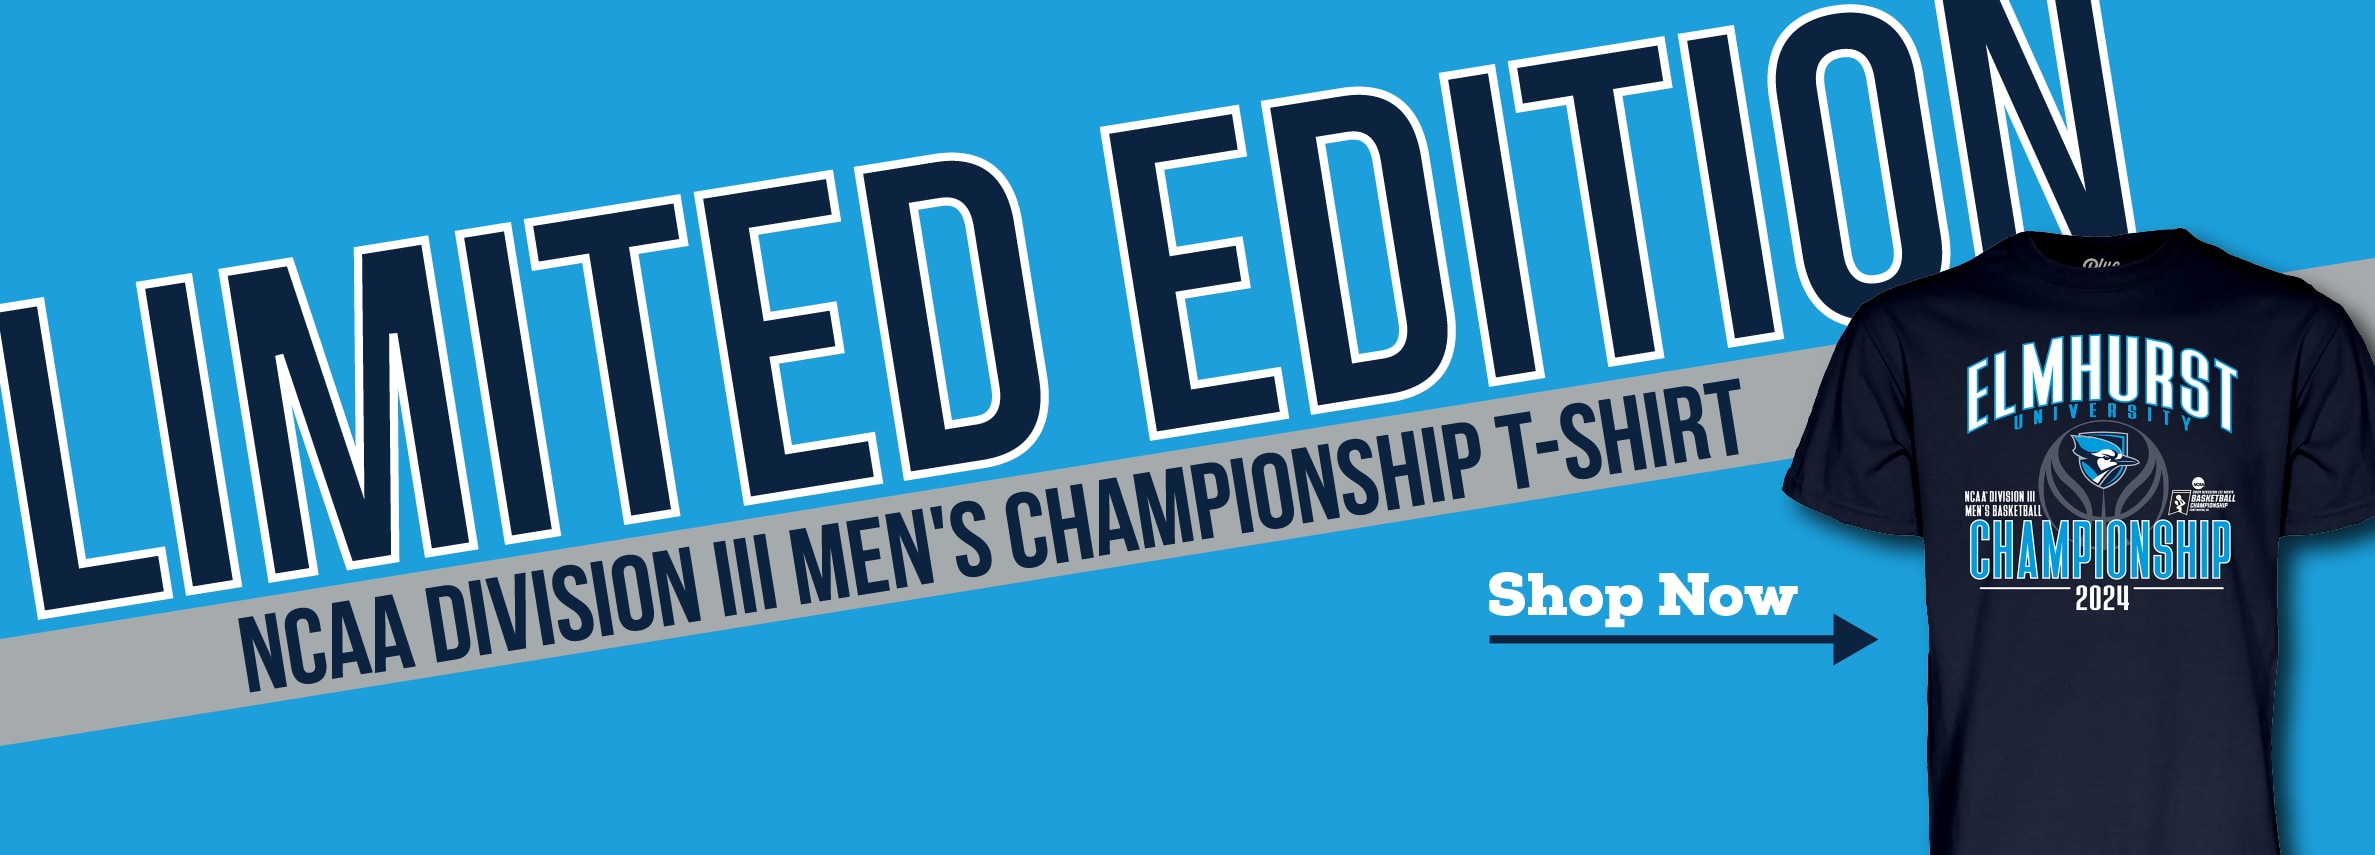 Limited Edition NCAA Division III Men's Basketball Championship T-shirt. Shop Now